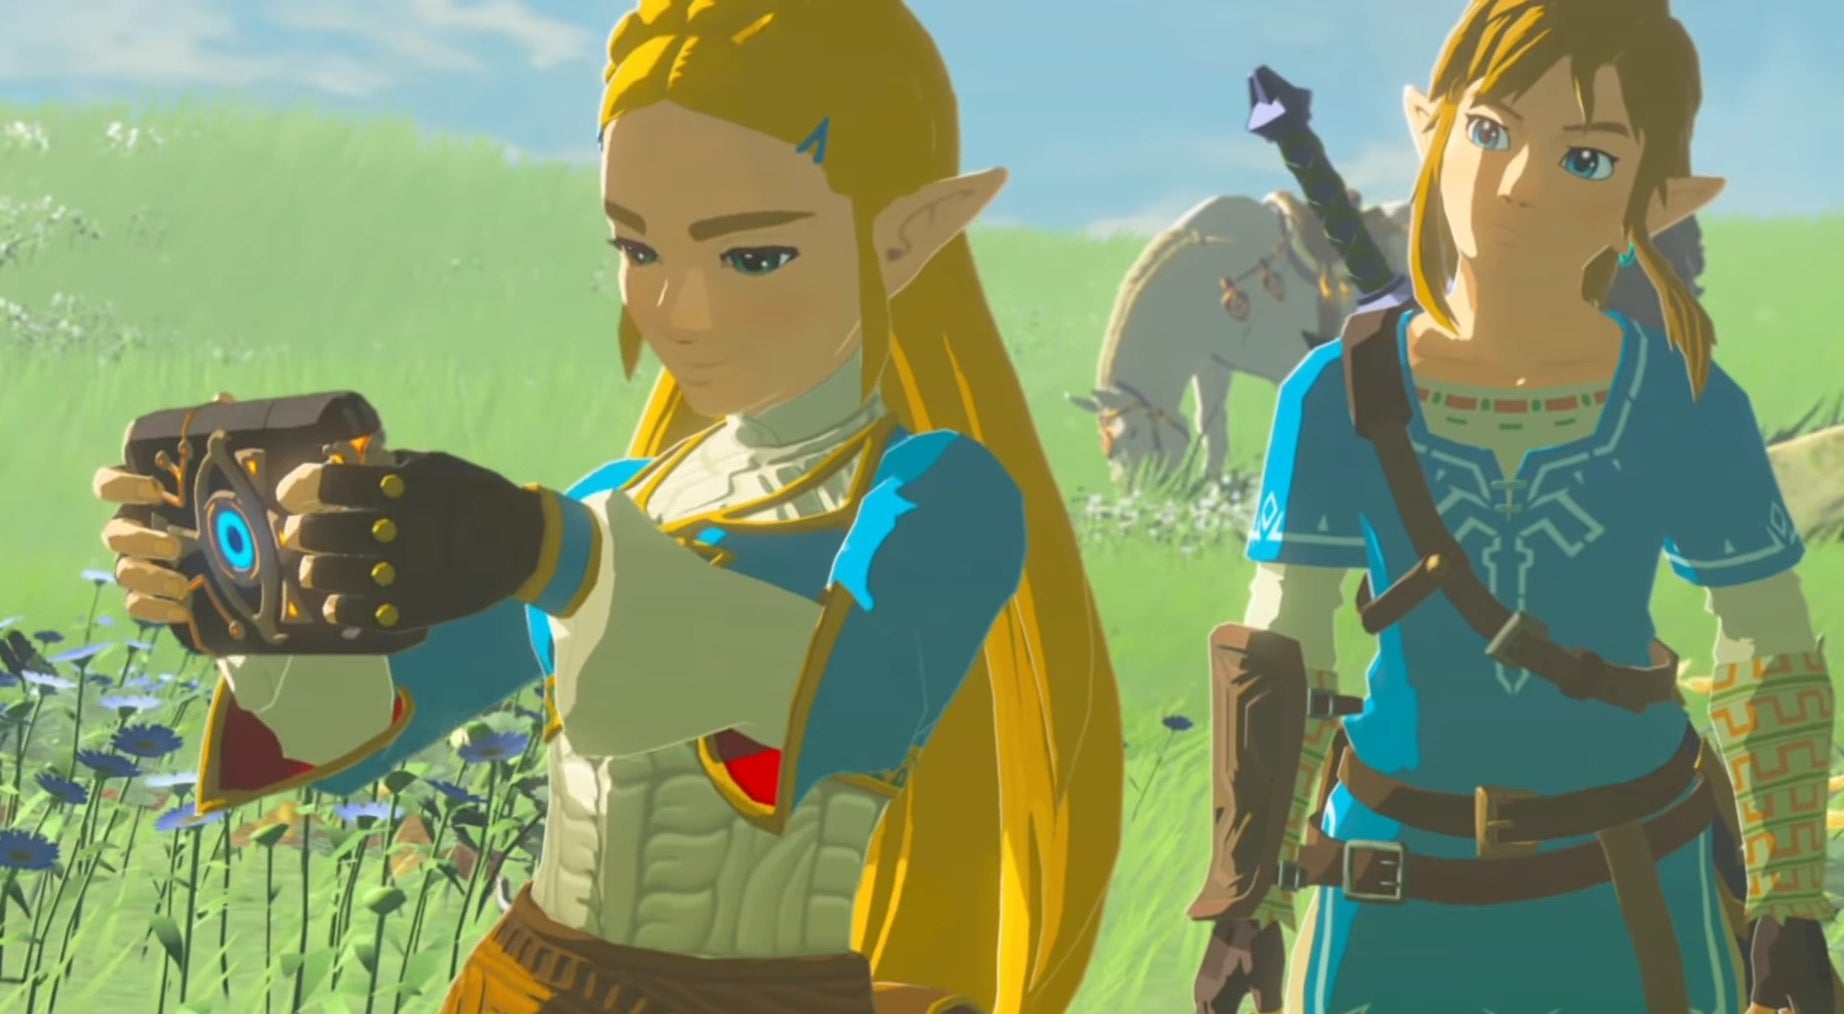 Zelda holding the Sheikah Slate with Link behind her in &quot;The Legend of Zelda: Breath of the Wild&quot;